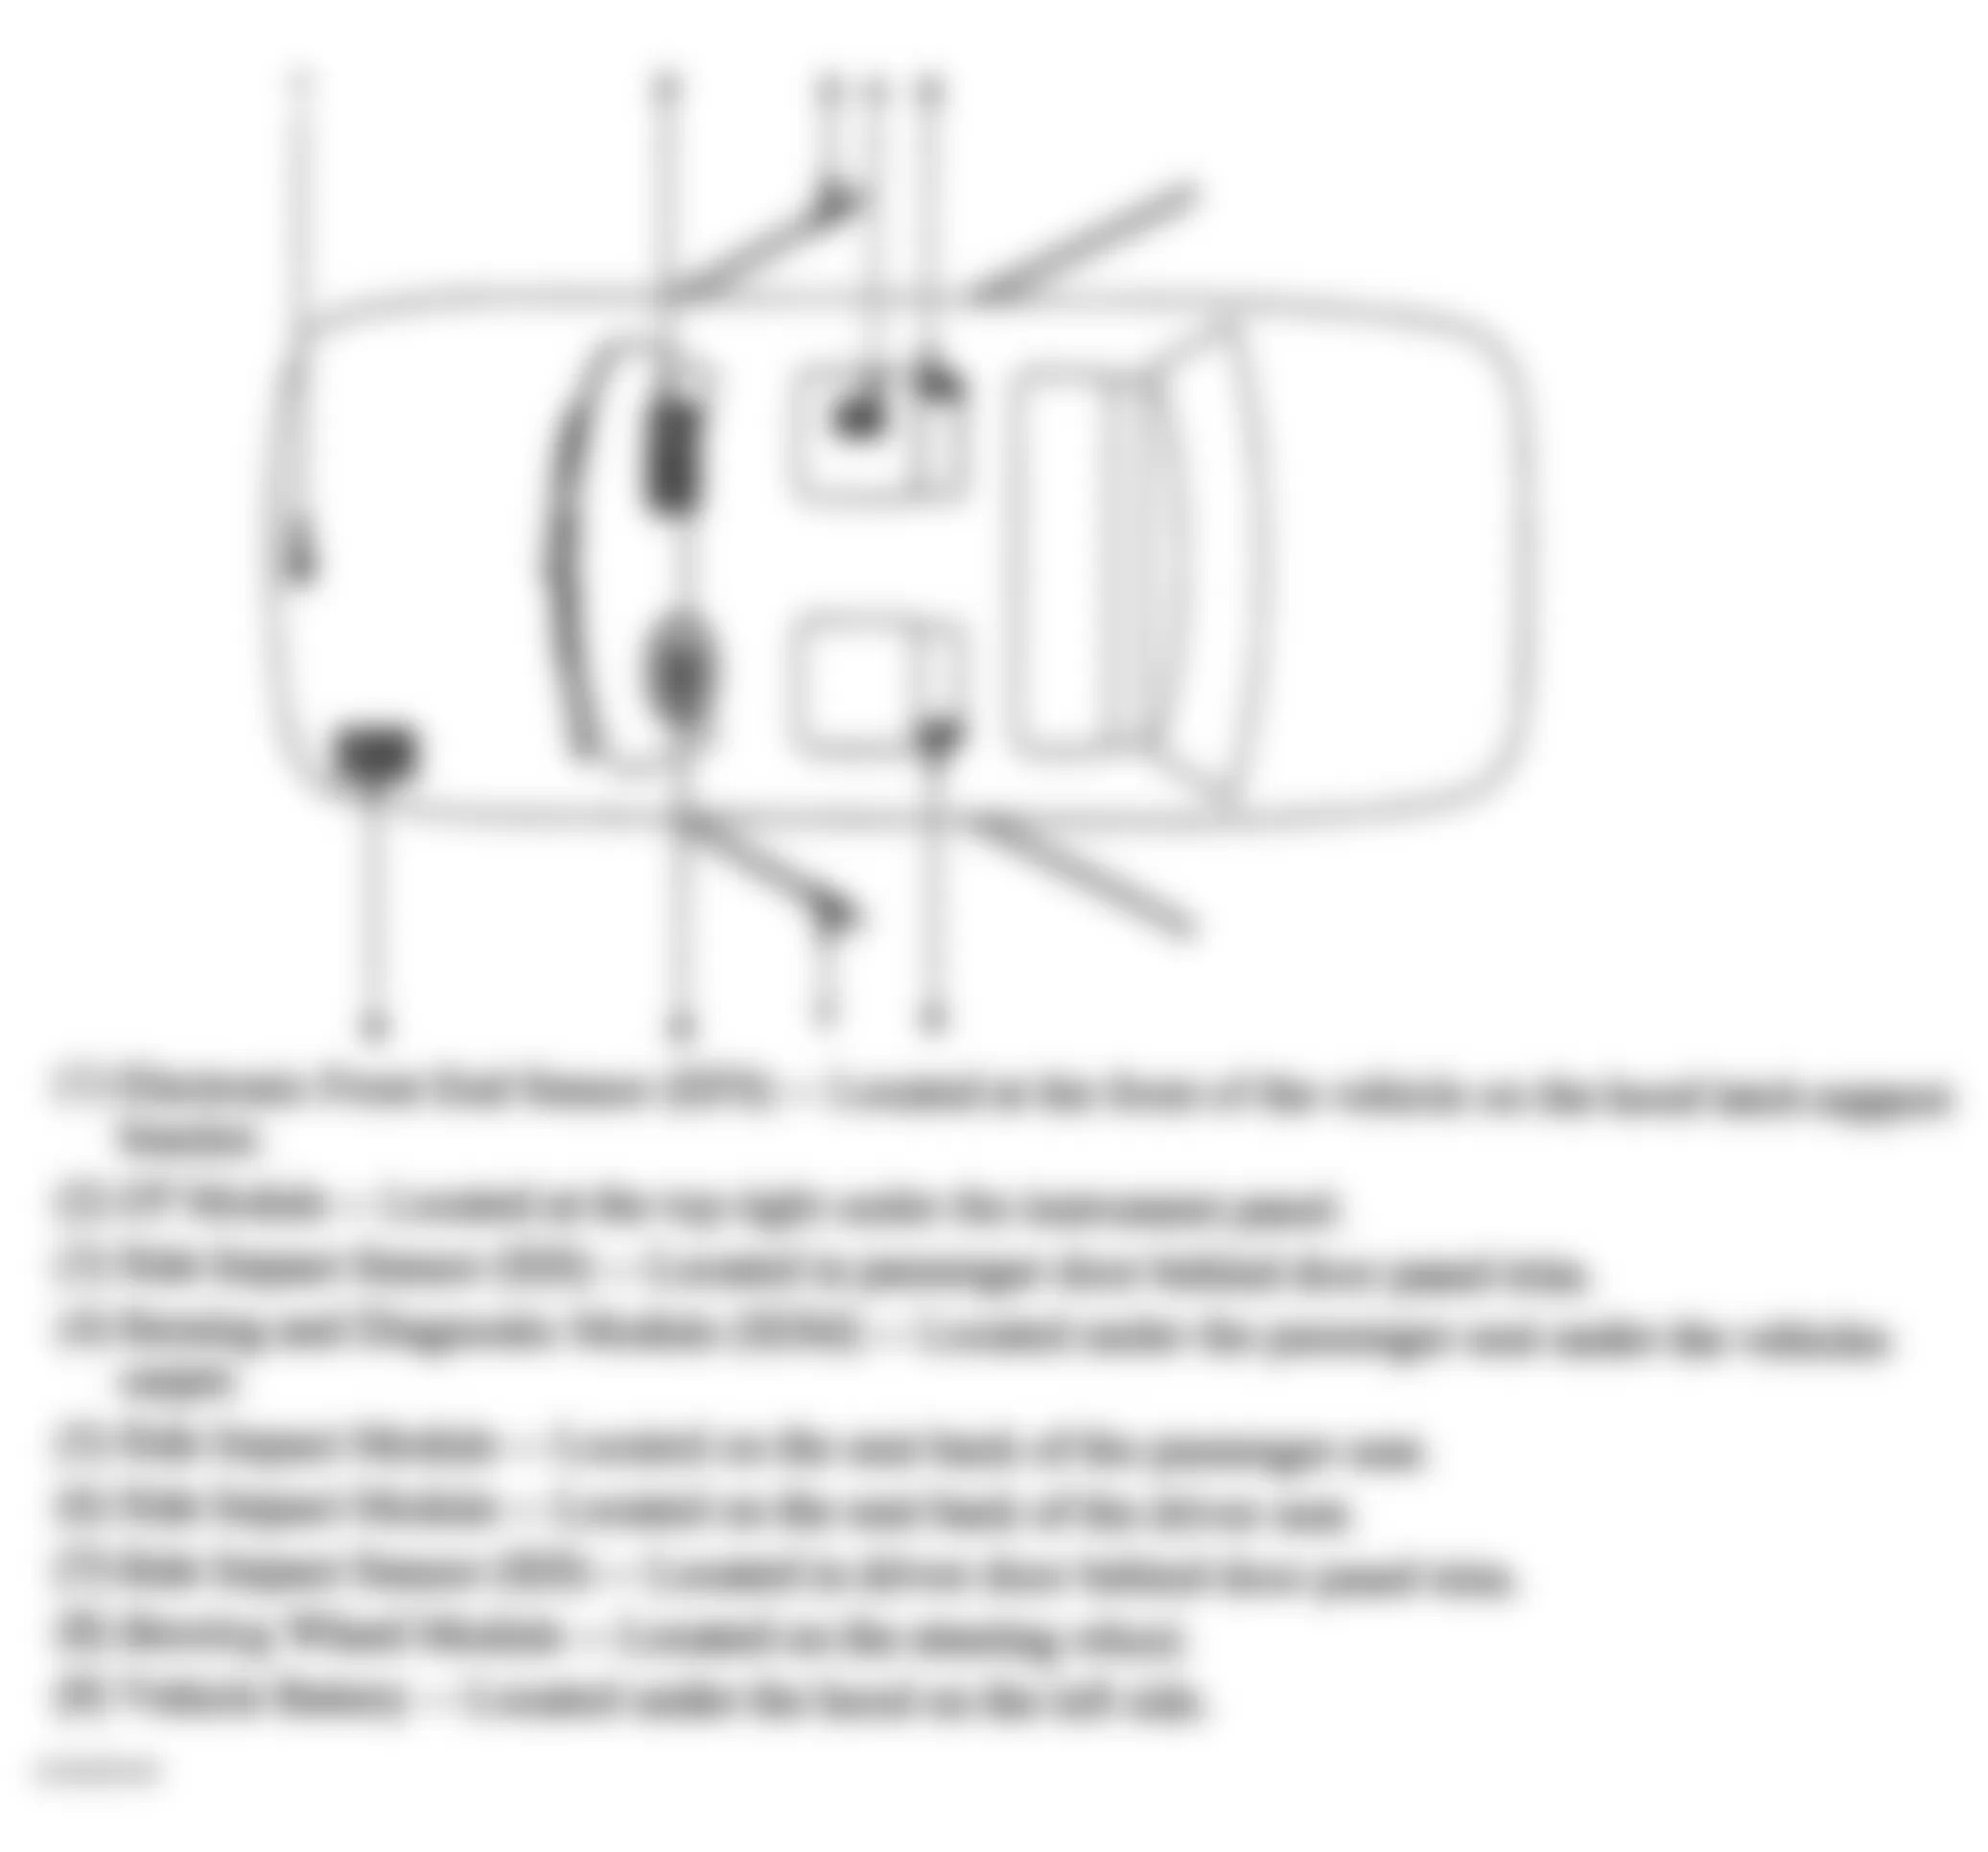 Chevrolet Cavalier 2005 - Component Locations -  Vehicle Overview Of Supplemental Inflatable Restraint Components (Coupe)